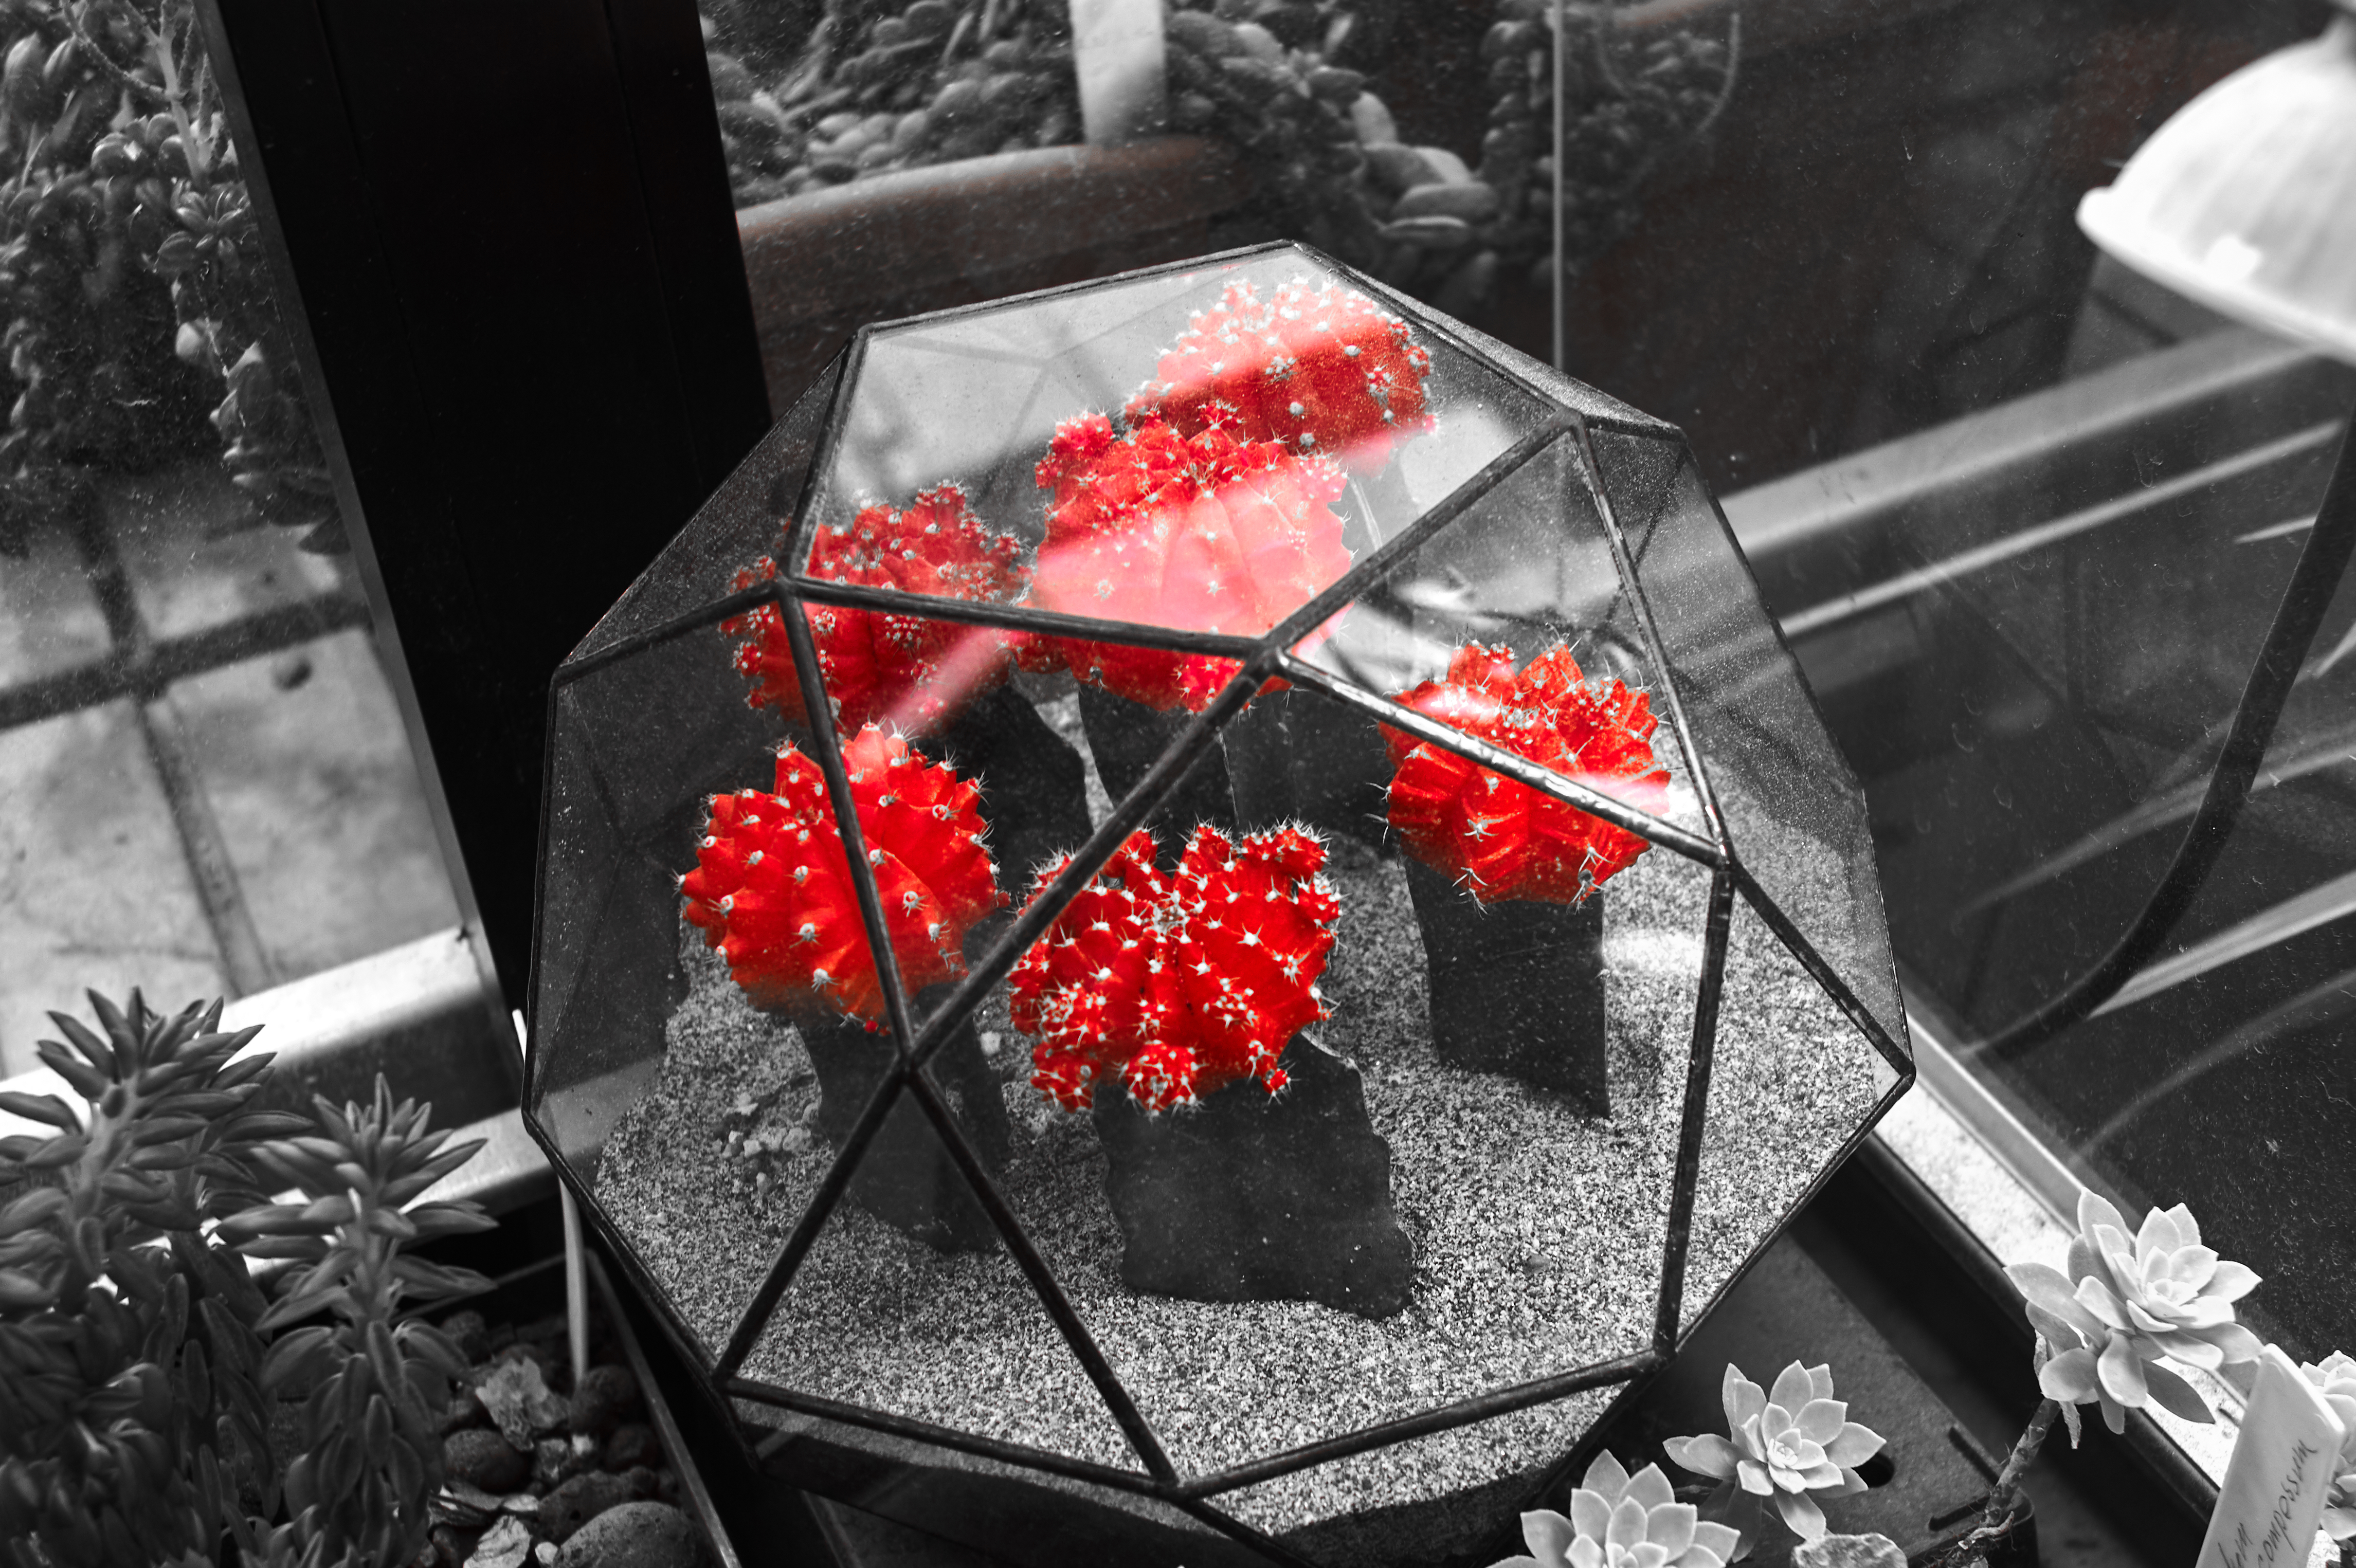 General 4582x3050 flowers red selective coloring plants